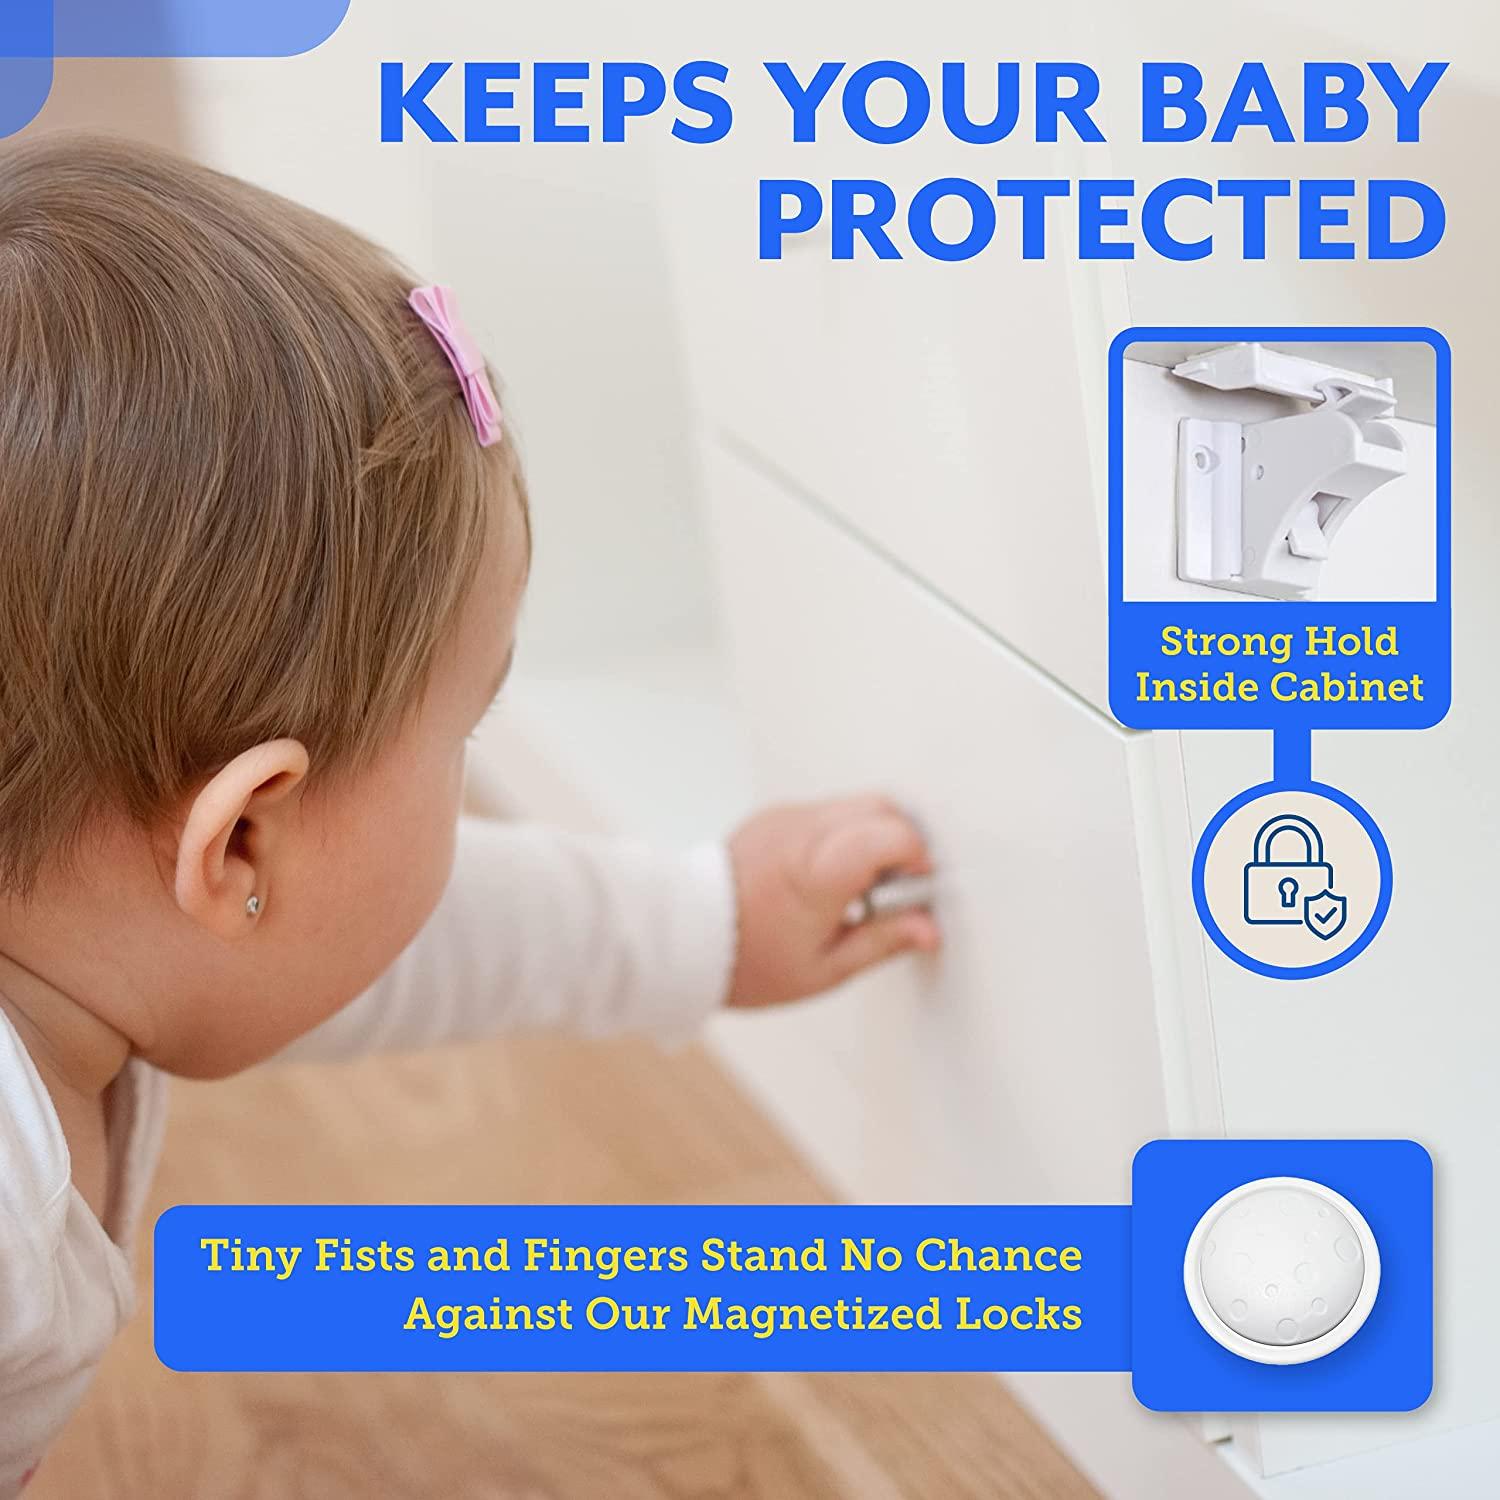 Eco-Baby Child Safety Magnetic Cabinet and Drawer Locks for